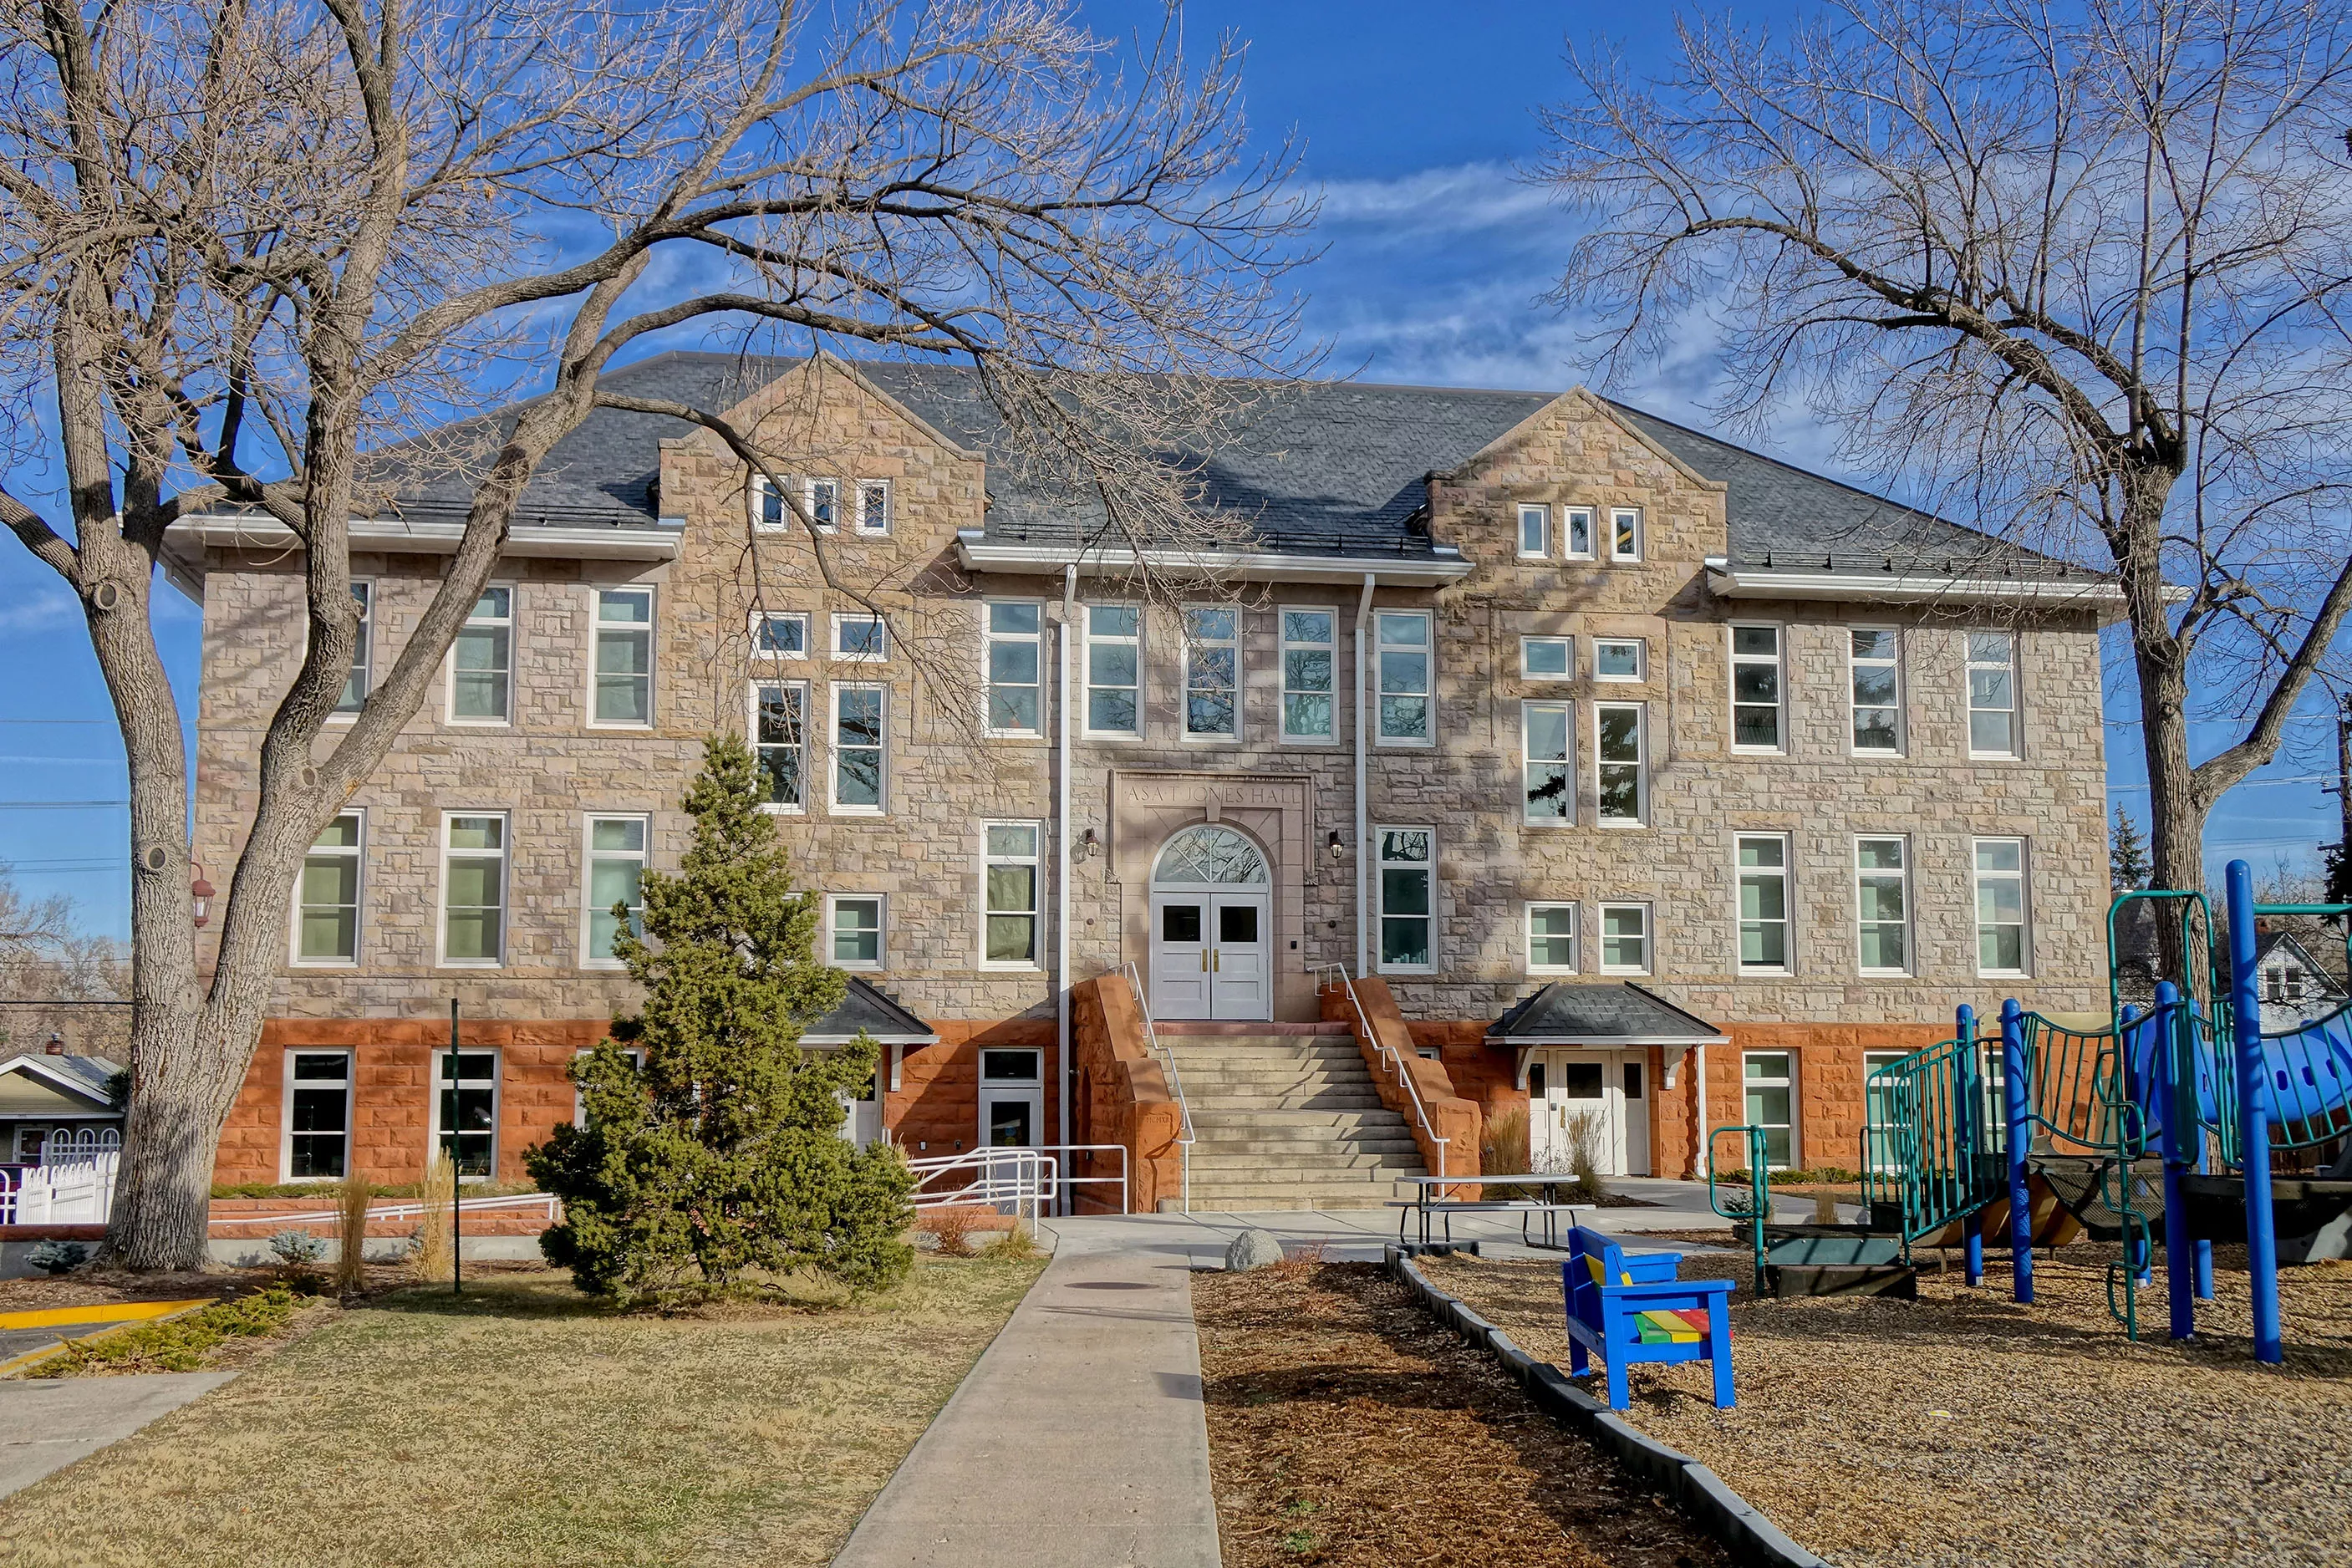 external view of the South side of the Jones Hall building with a playground in the right foreground.